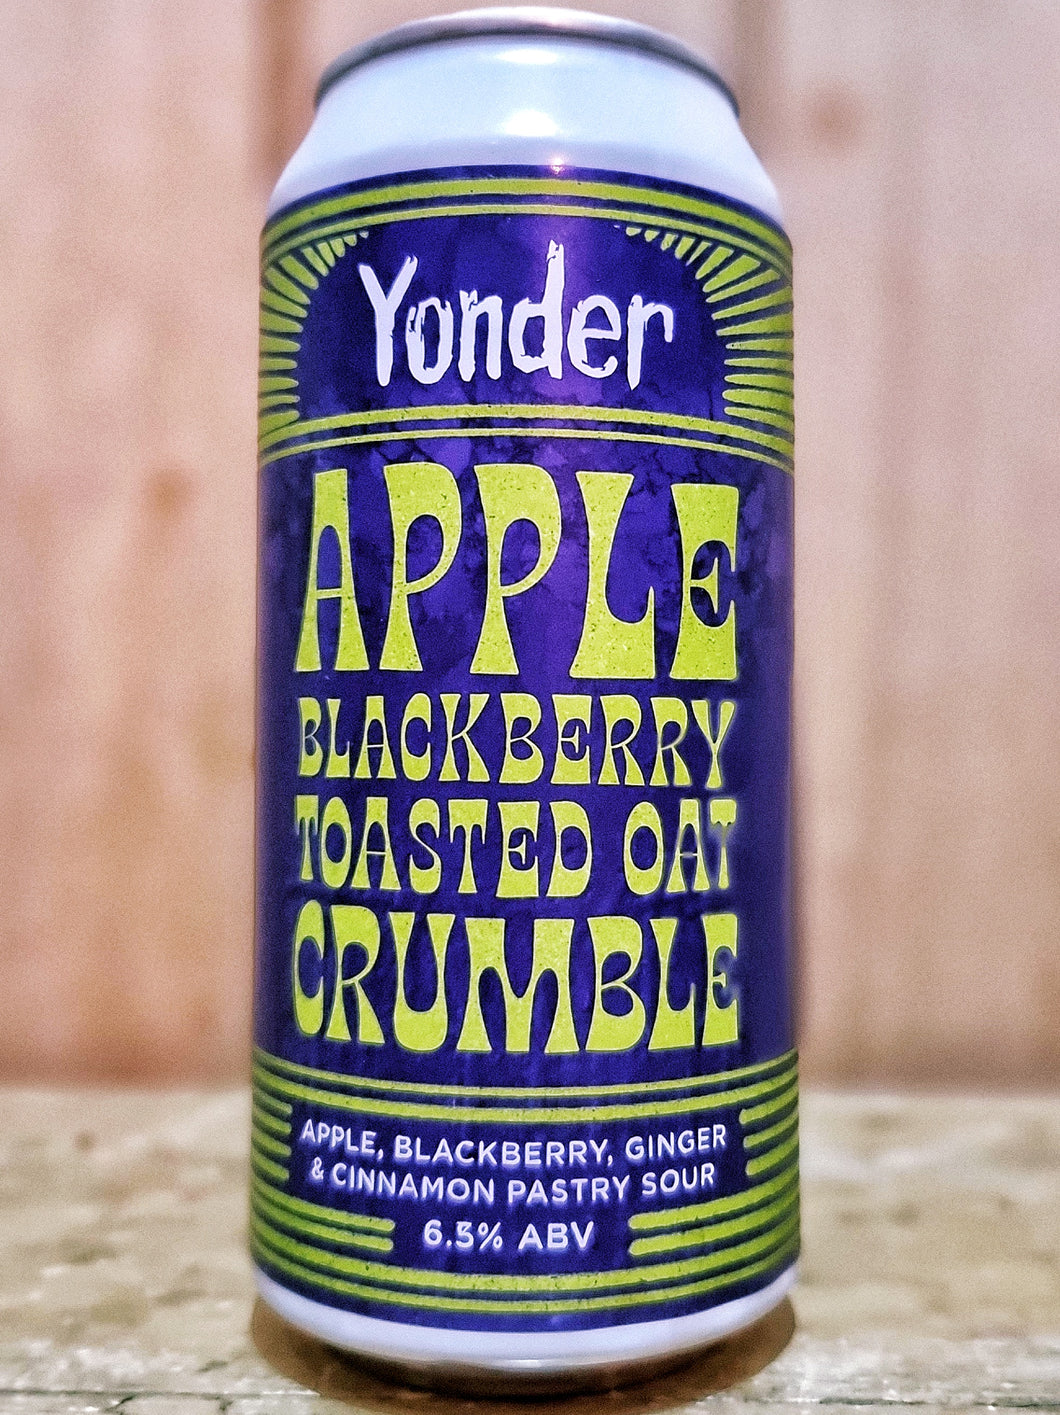 Yonder Brewing - Apple Blackberry Toasted Oat Crumble